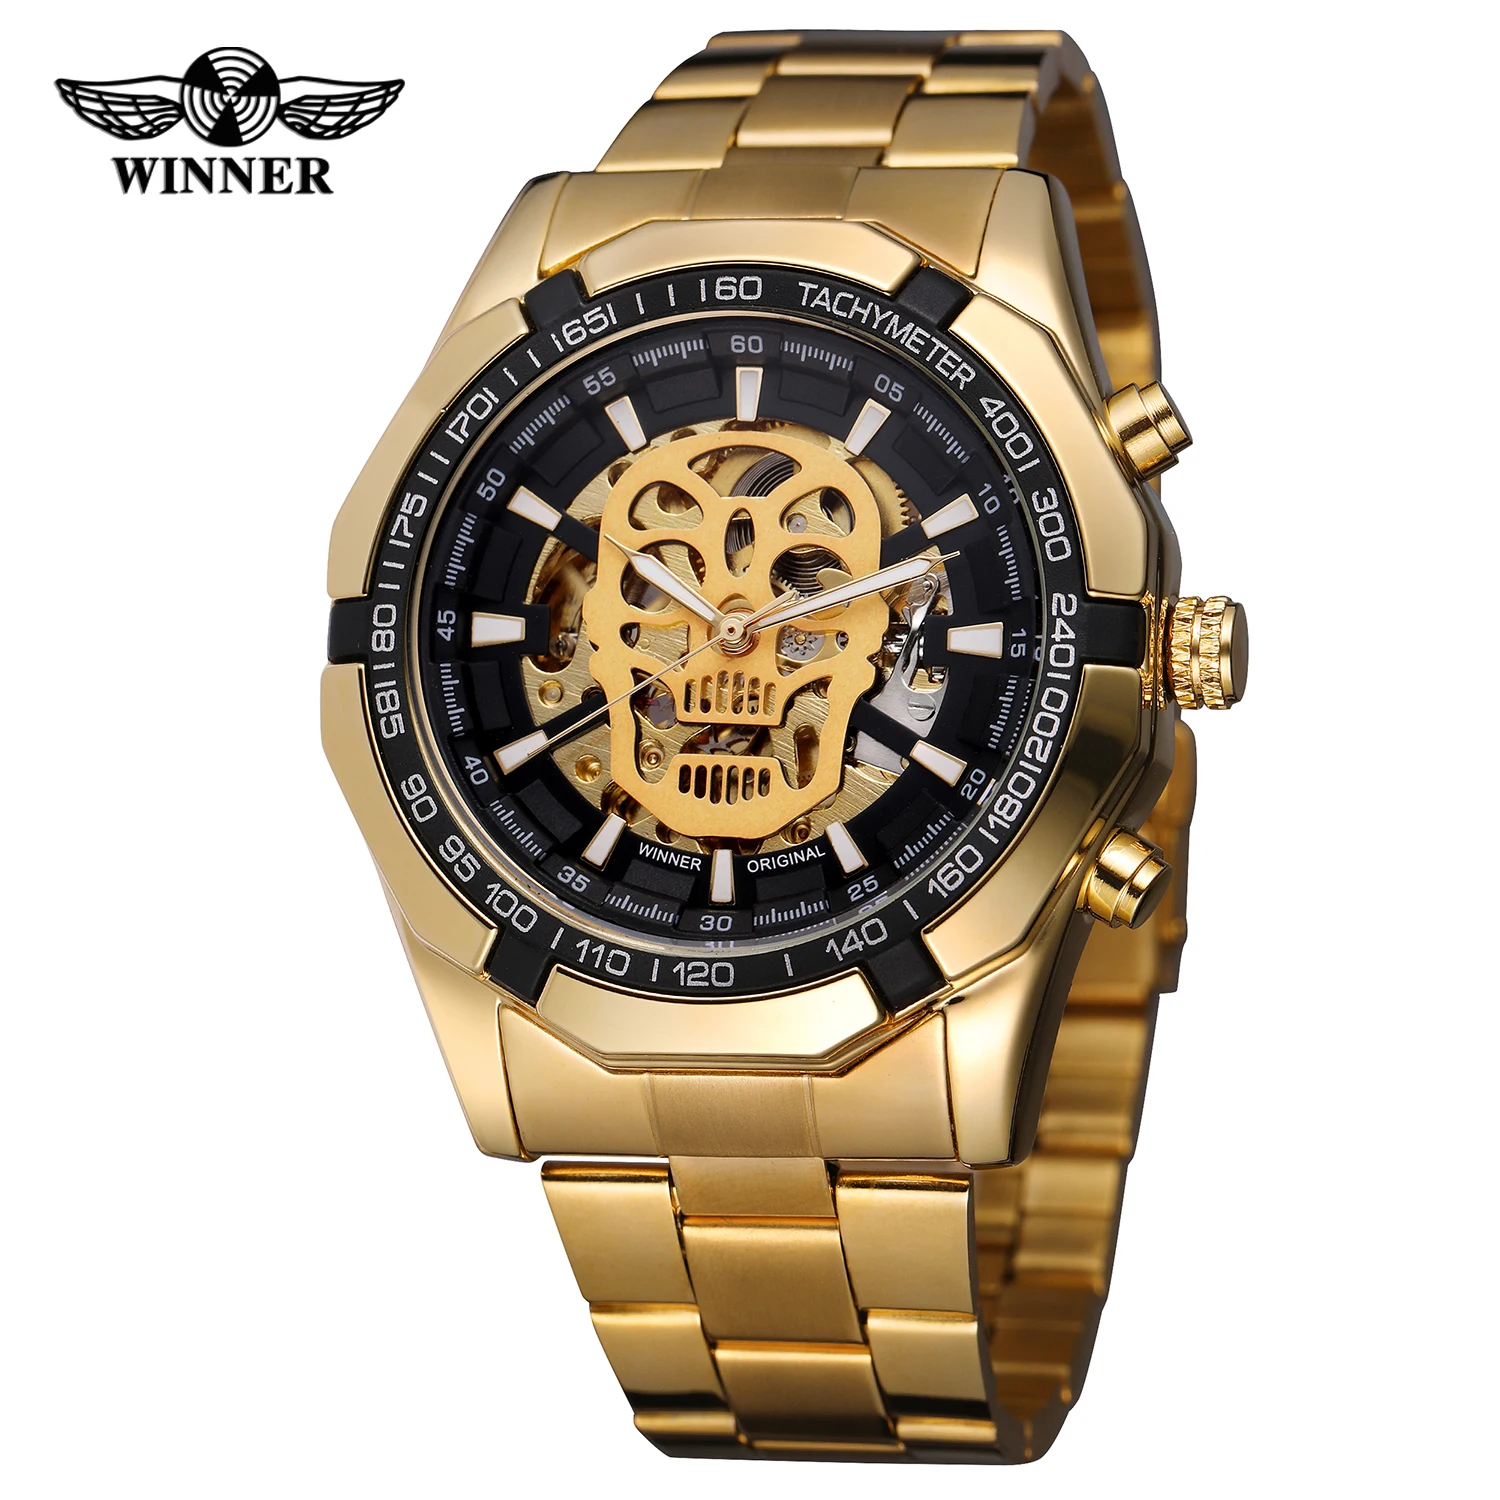 Winner Mens Automatic Mechanical Wind Up Watch Stainless Steel Bracelet  Watches | eBay